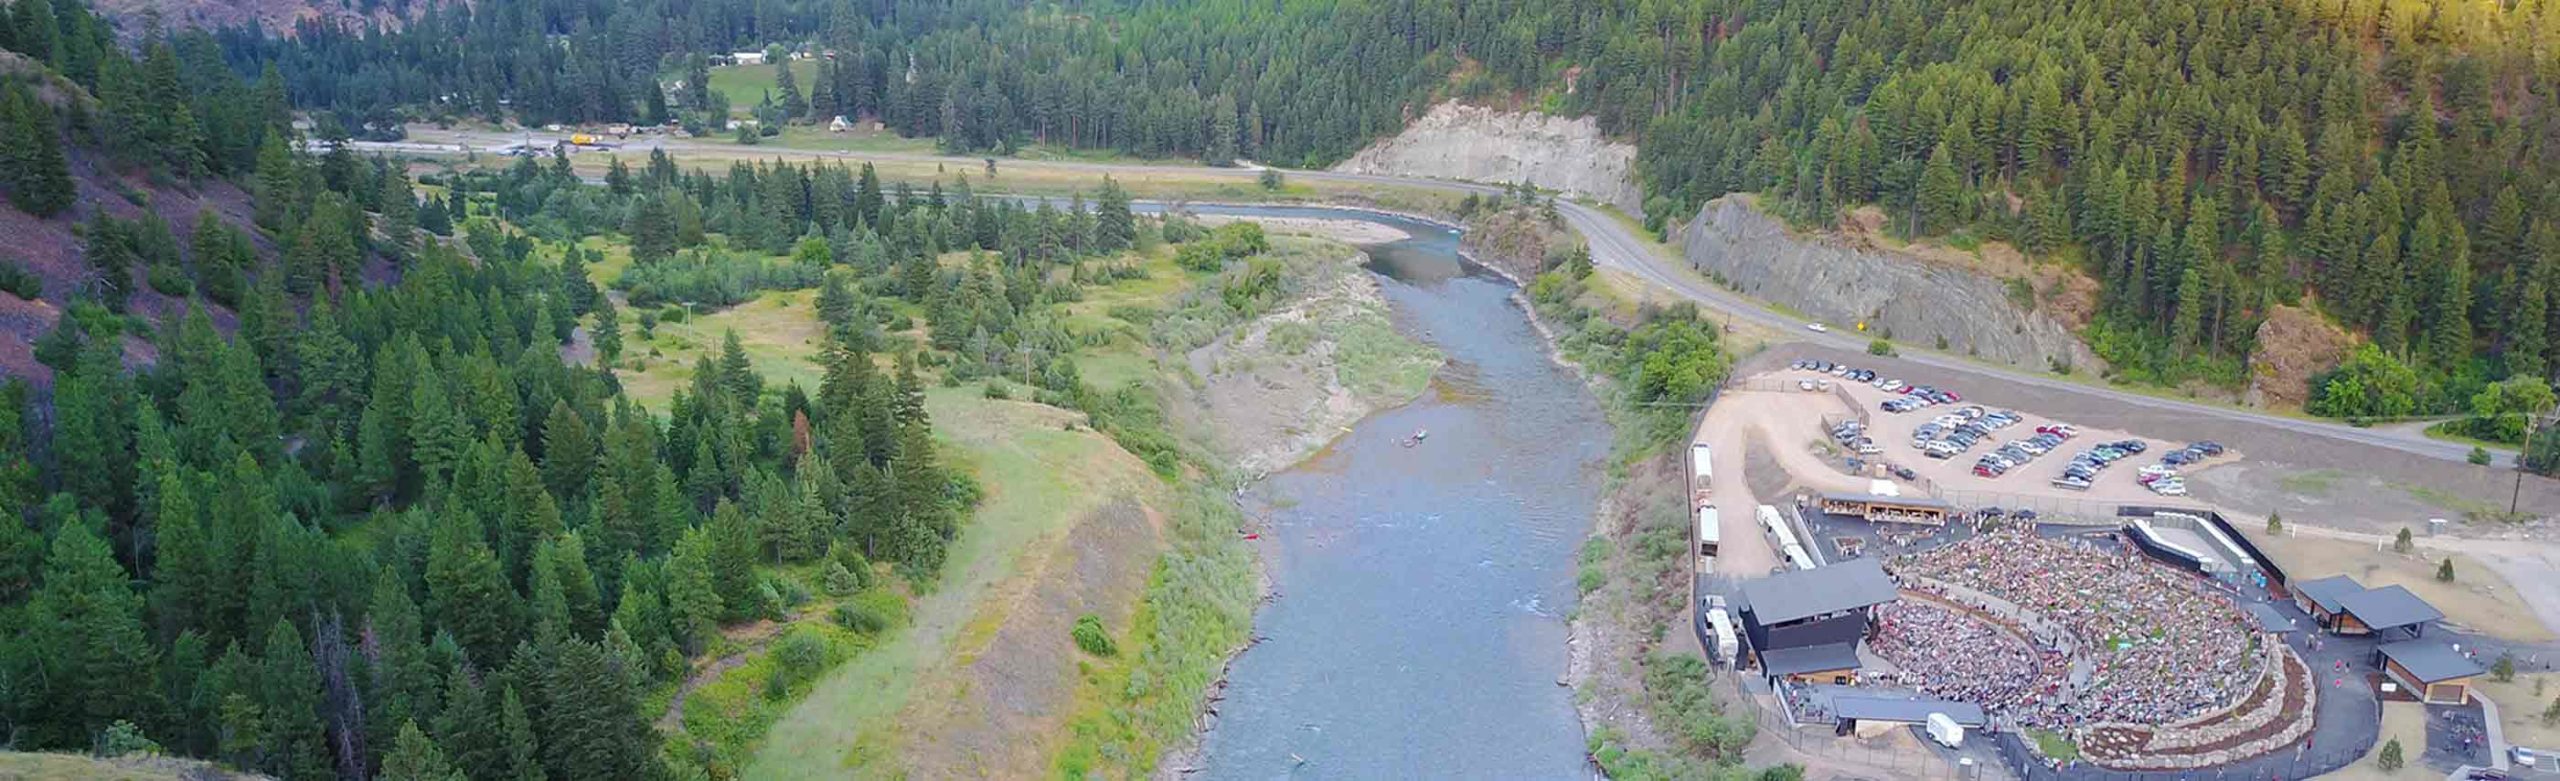 Logjam Foundations’ Blackfoot River Fund Donates $106,000 to Montana Trout Unlimited Image